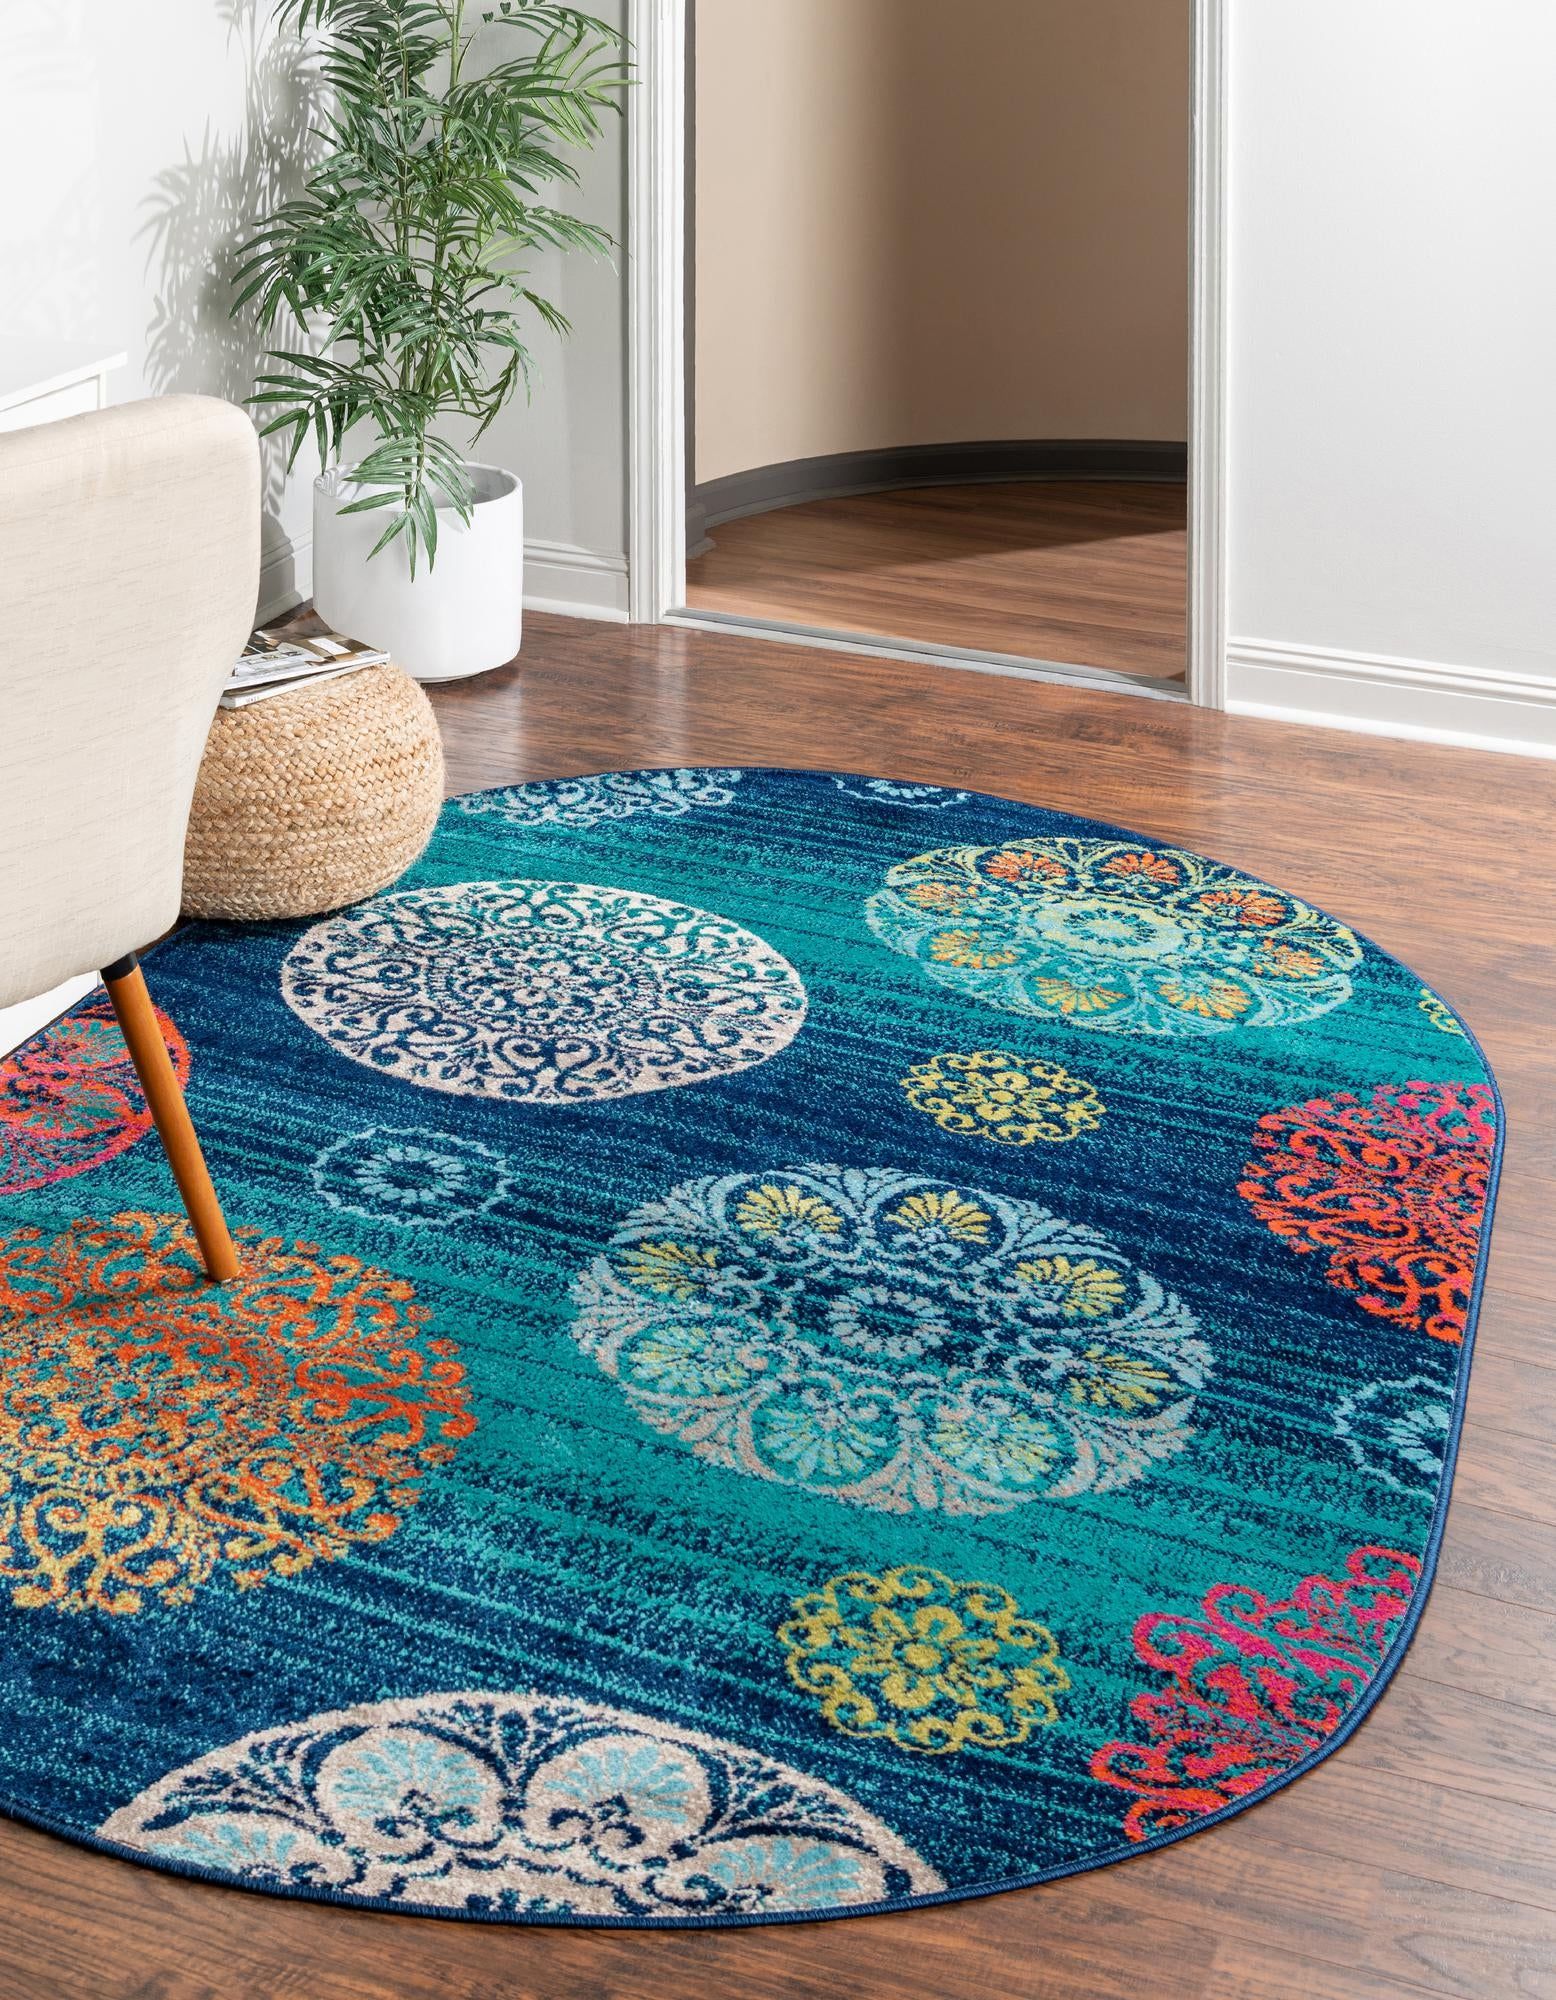 Unique Loom Aromi Azalea Rug Navy Blue/ivory 5' 3" X 8' Oval Botanical  Transitional Perfect For Dining Room Bed Room Kids Room Play Room –  Walmart Pertaining To Botanical Oval Rugs (Photo 10 of 15)